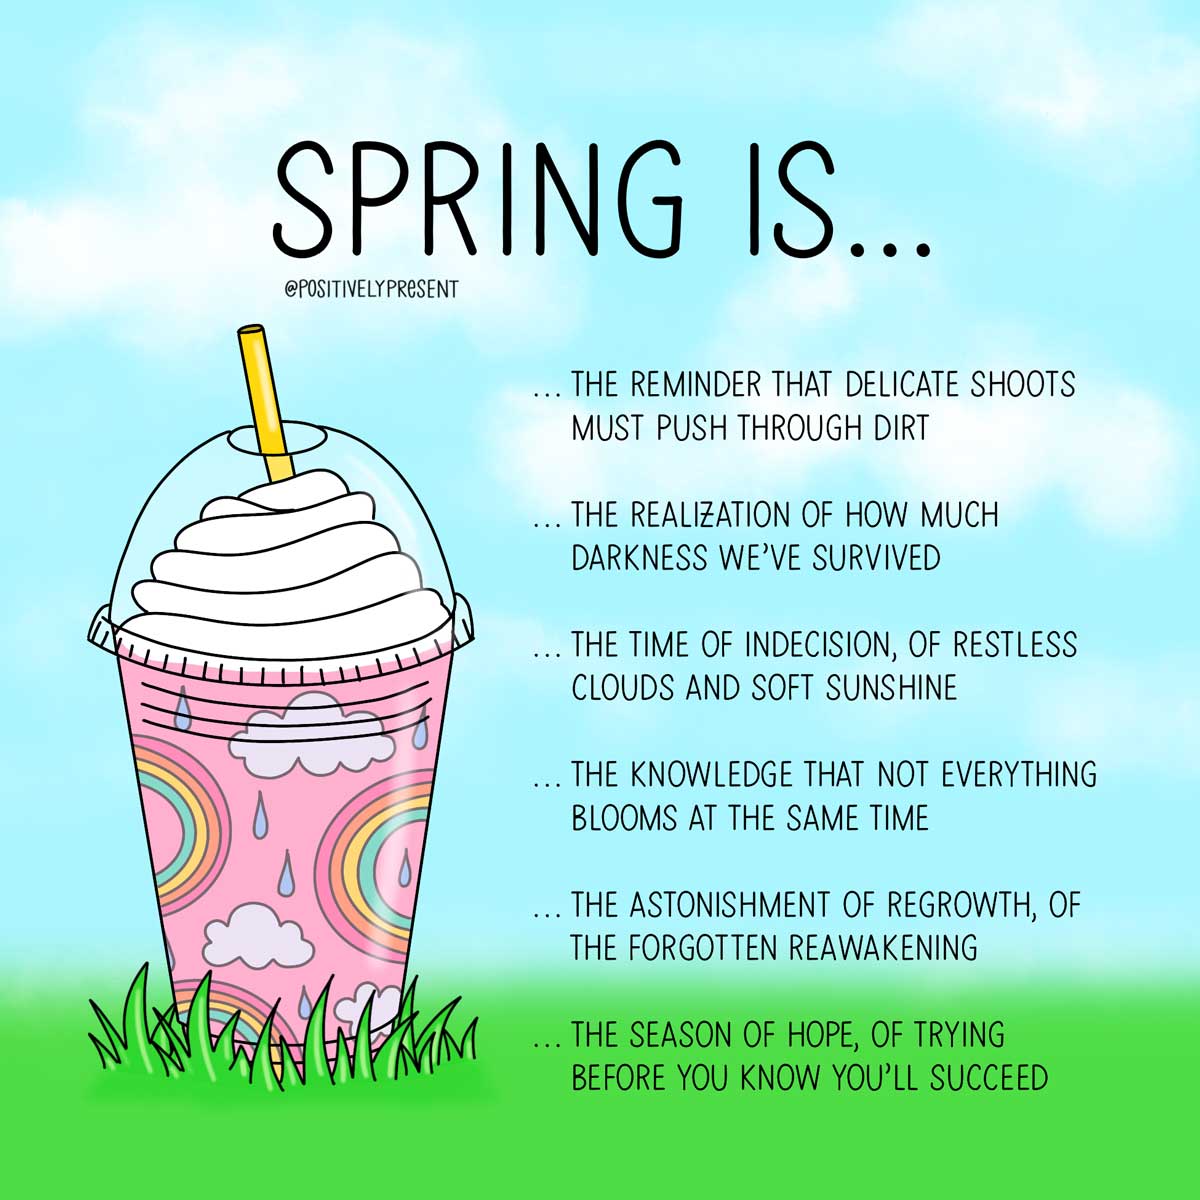 soft serve in pink cup on green grass lists things spring is.